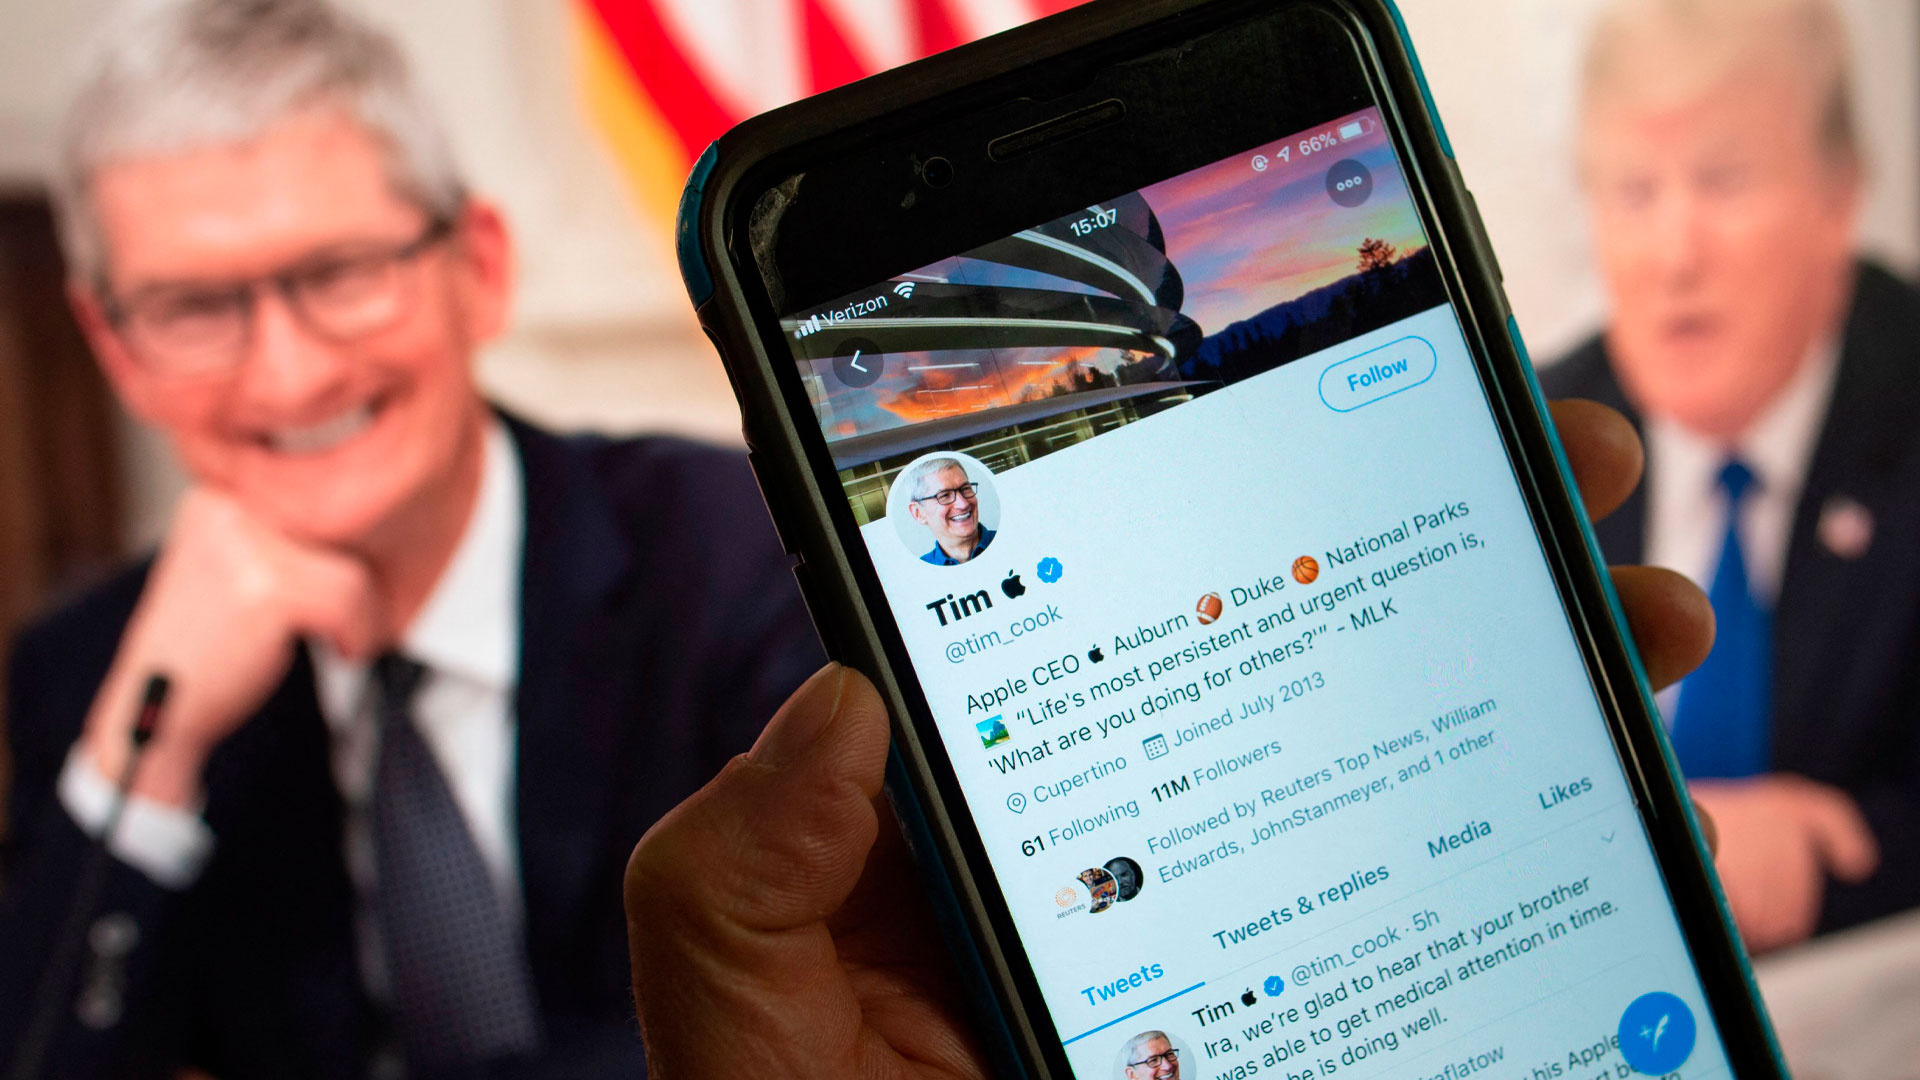 Tim Cook on Twitter